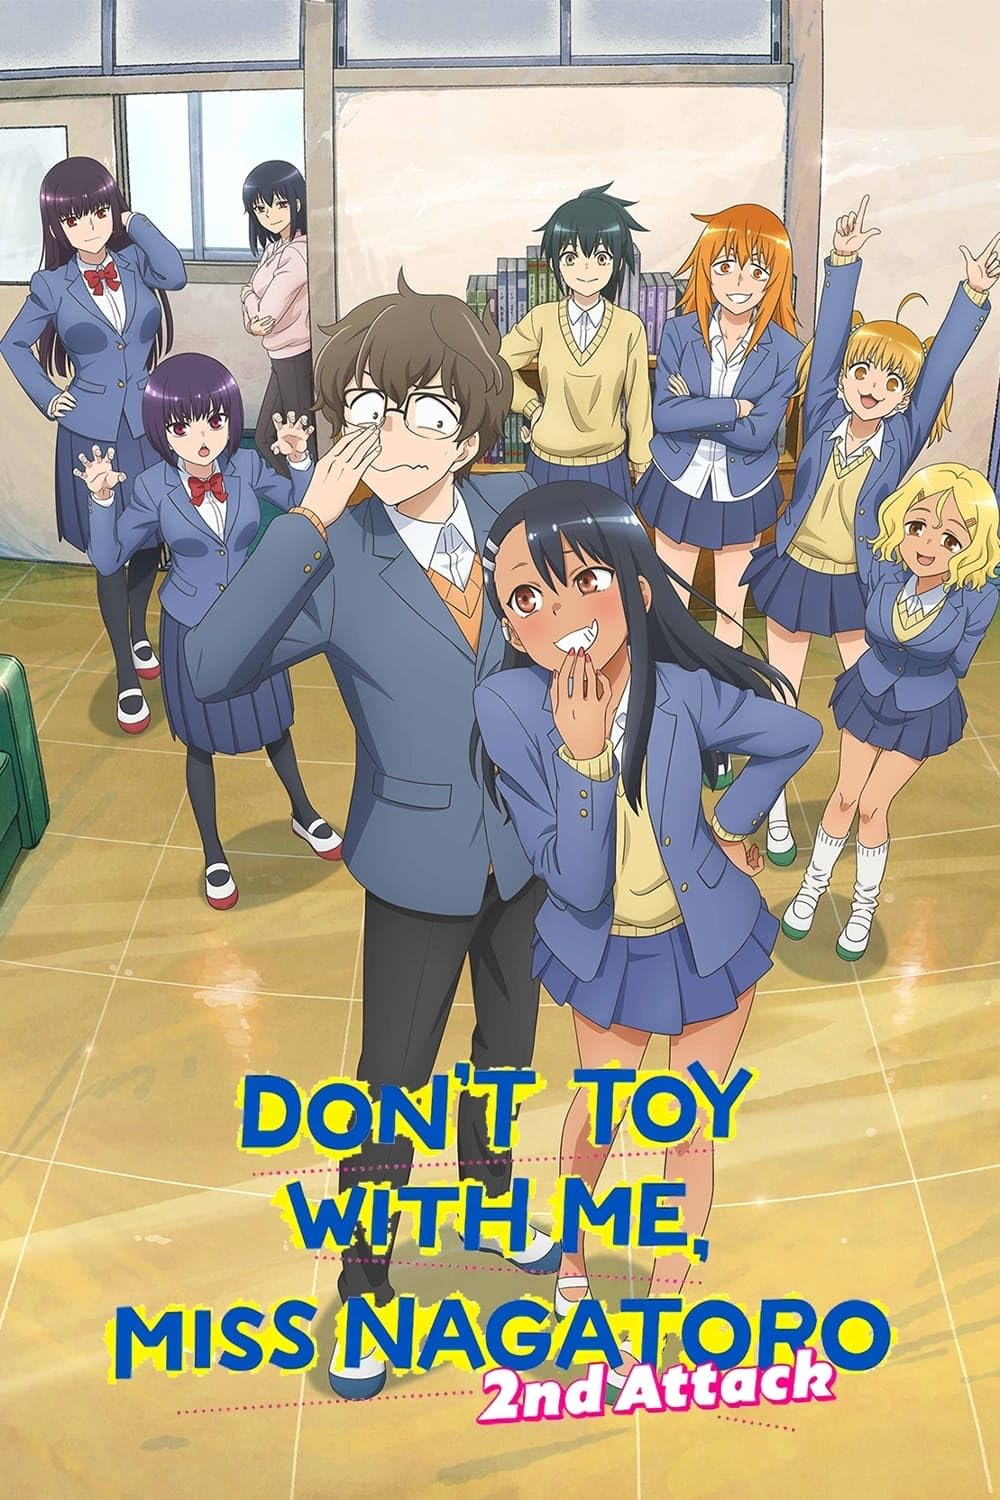 Don't Toy with Me, Miss Nagatoro